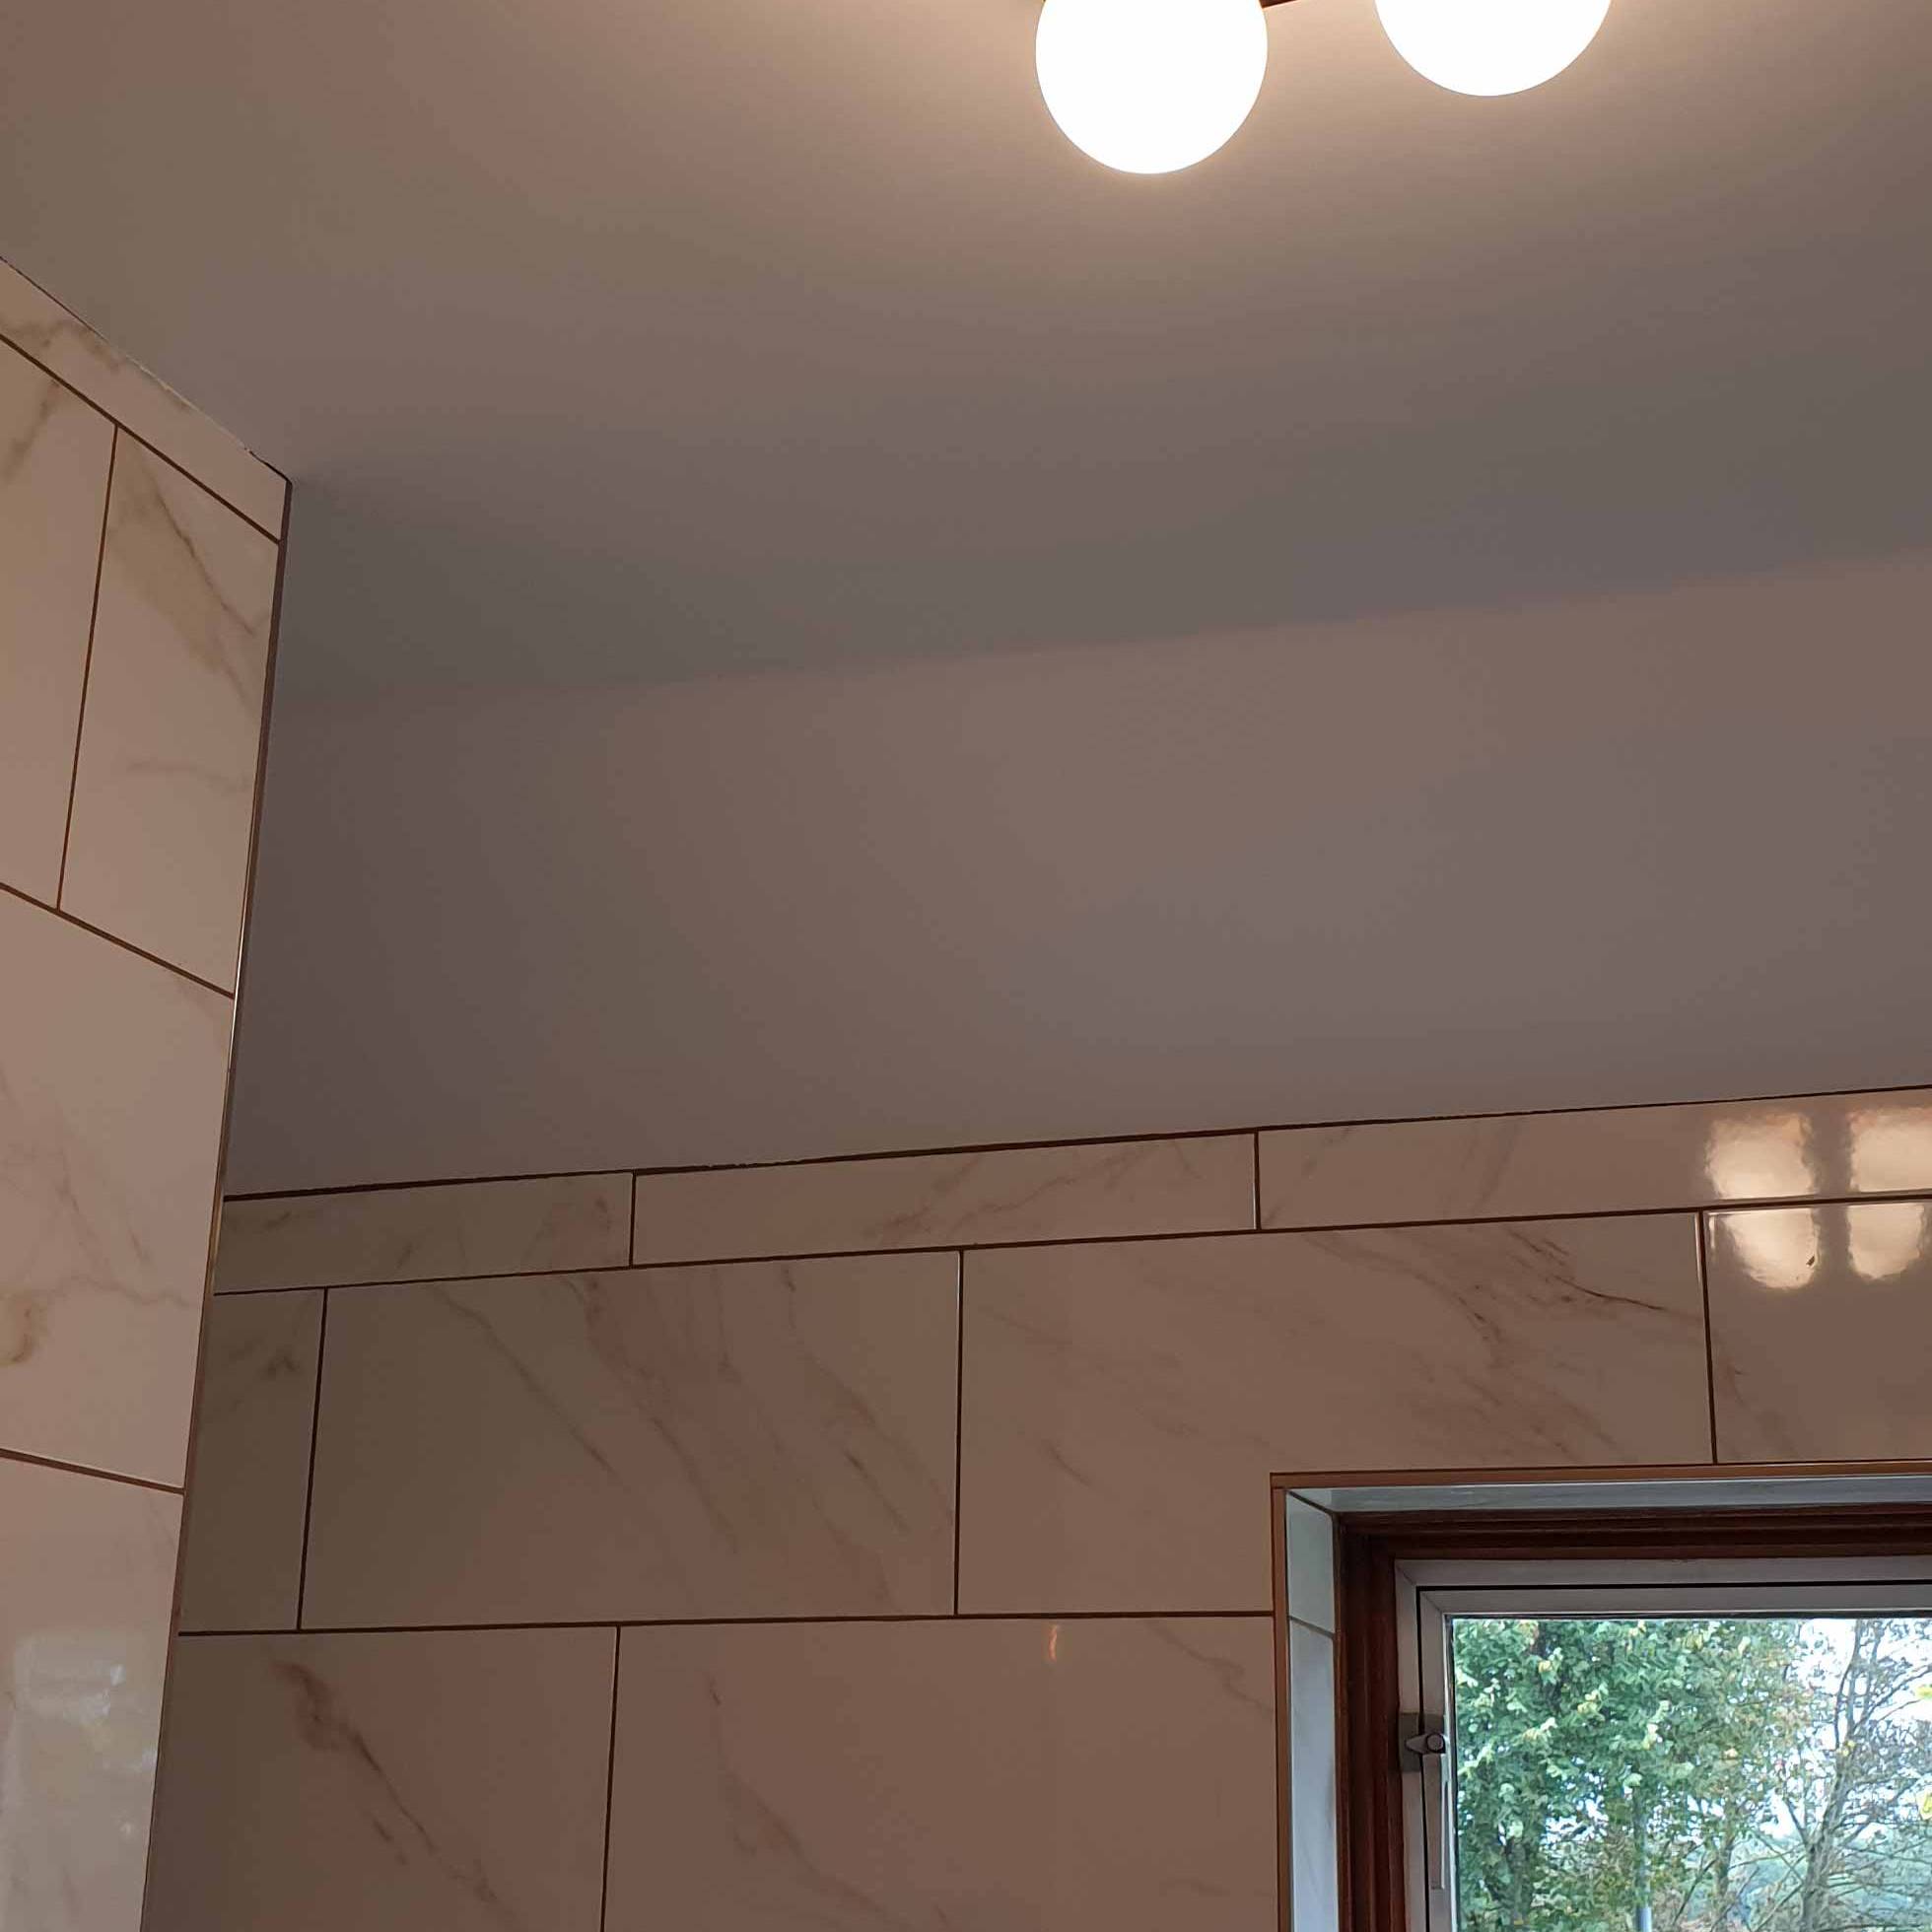 Cleverspark Electrical Installers and Electrians based in Bristol, Bath and the South West of England - An example of interior bathroom light fixtures/fittings